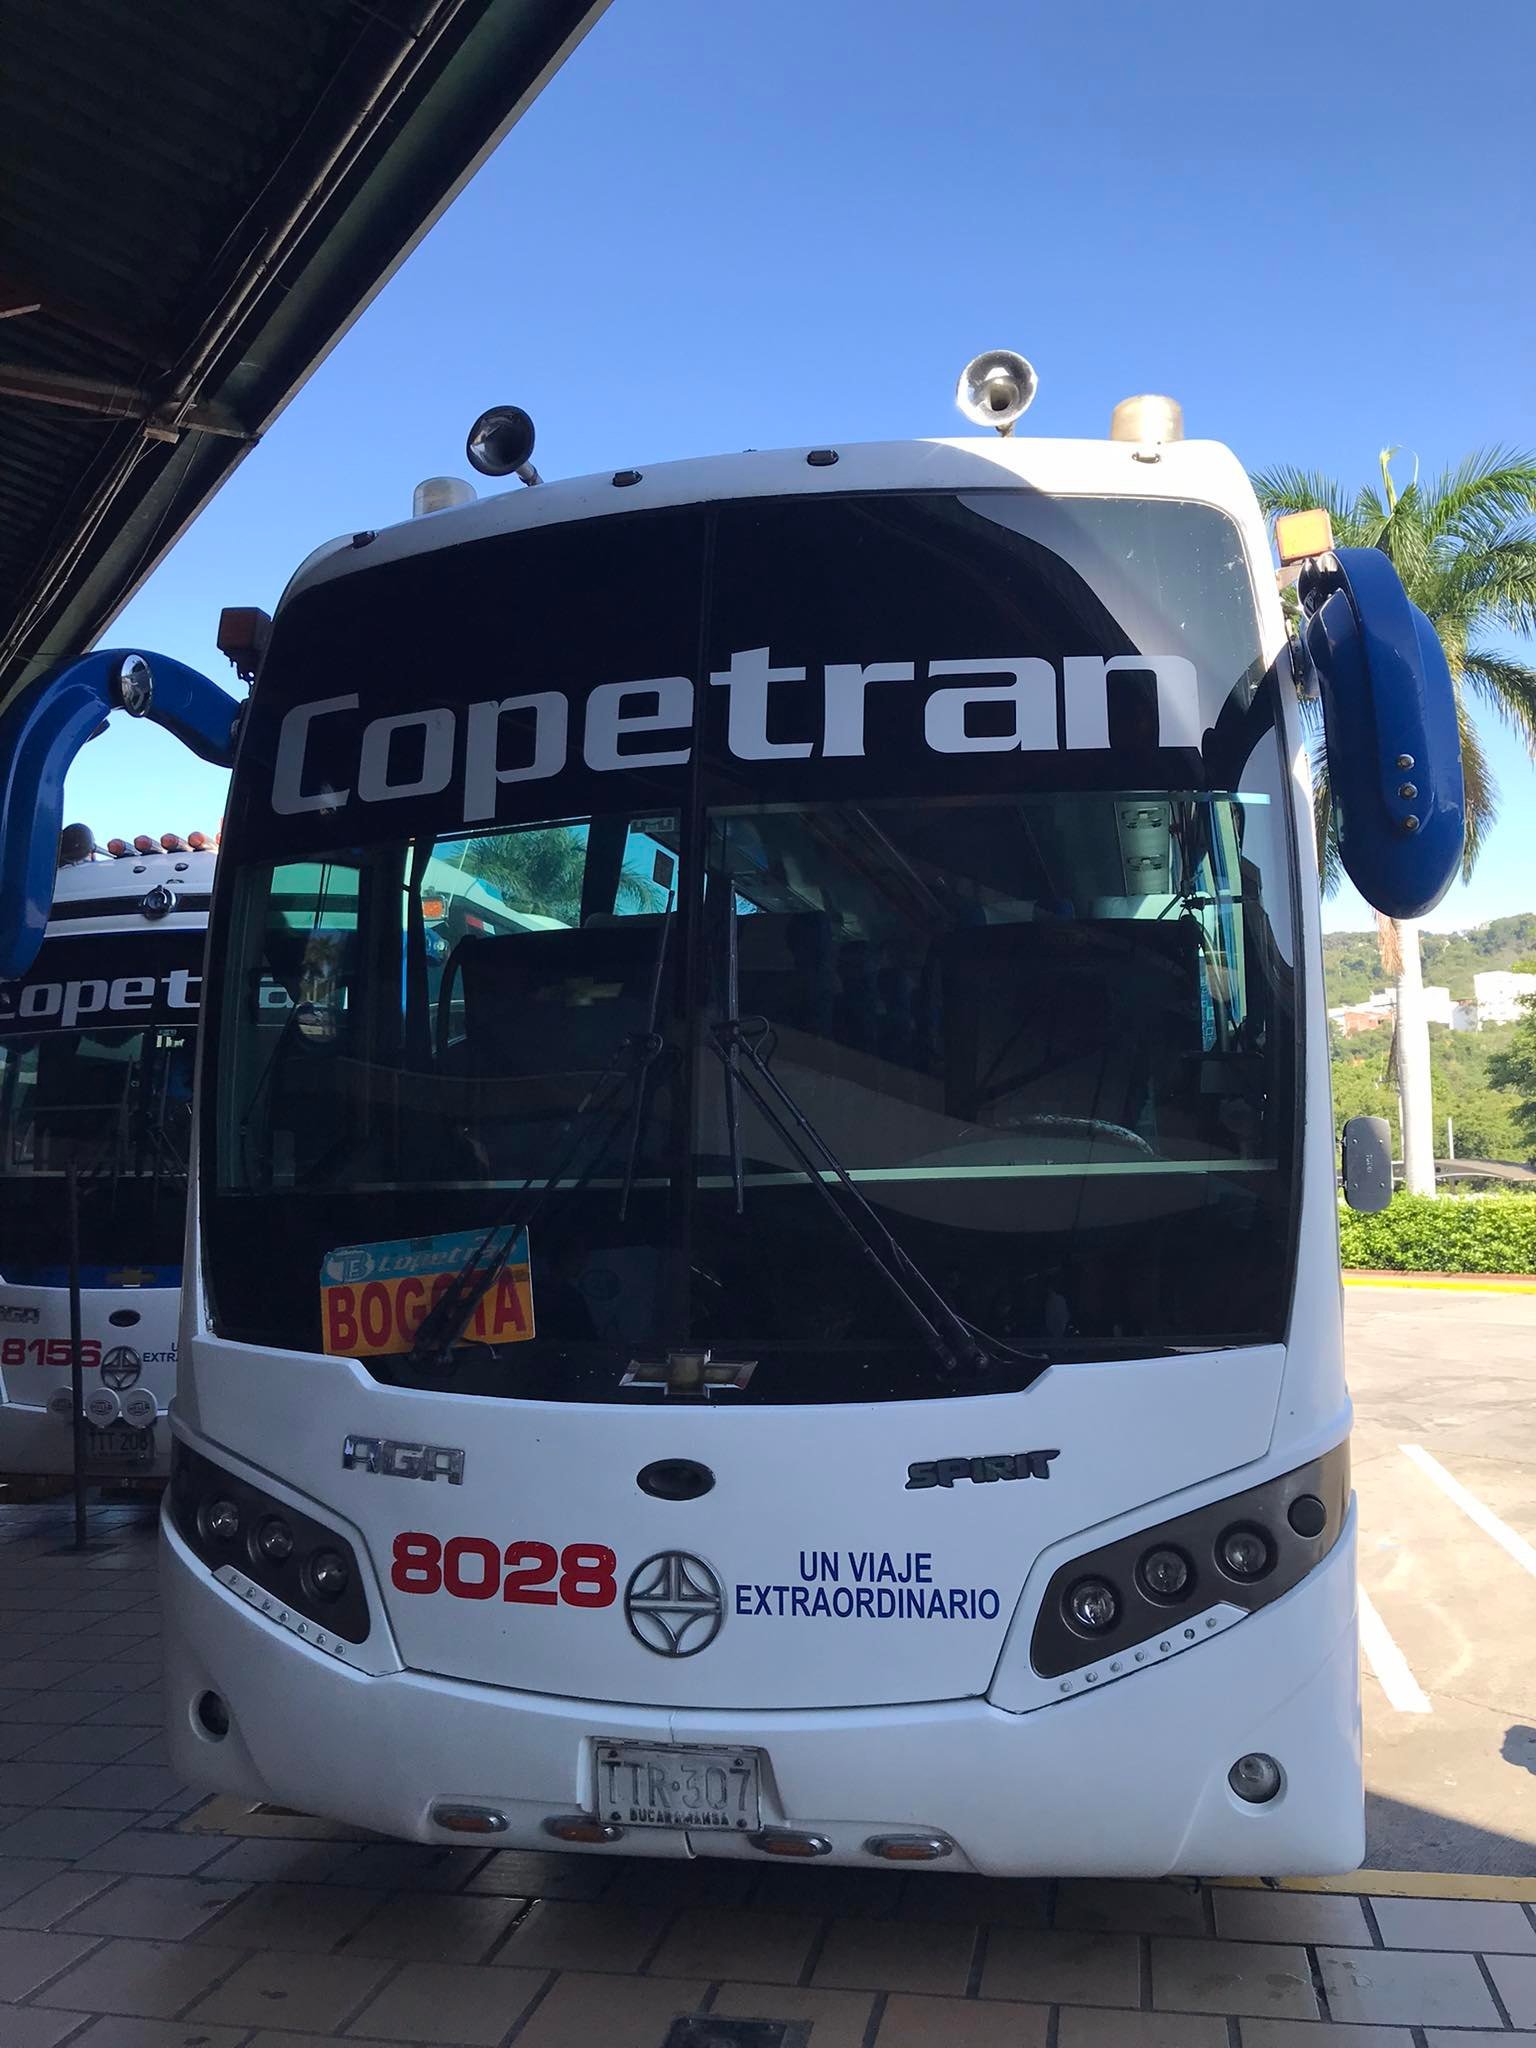 How To Get From Bucaramanga to San Gil - All Possible Ways, cheapest way from Bucaramanga to San Gil, cheapest way from Bucaramanga to San Gil, Bucaramanga to San Gil, bus Bucaramanga to San Gil, San Gil where to stay, Copetran bus Bucaramanga to San Gil